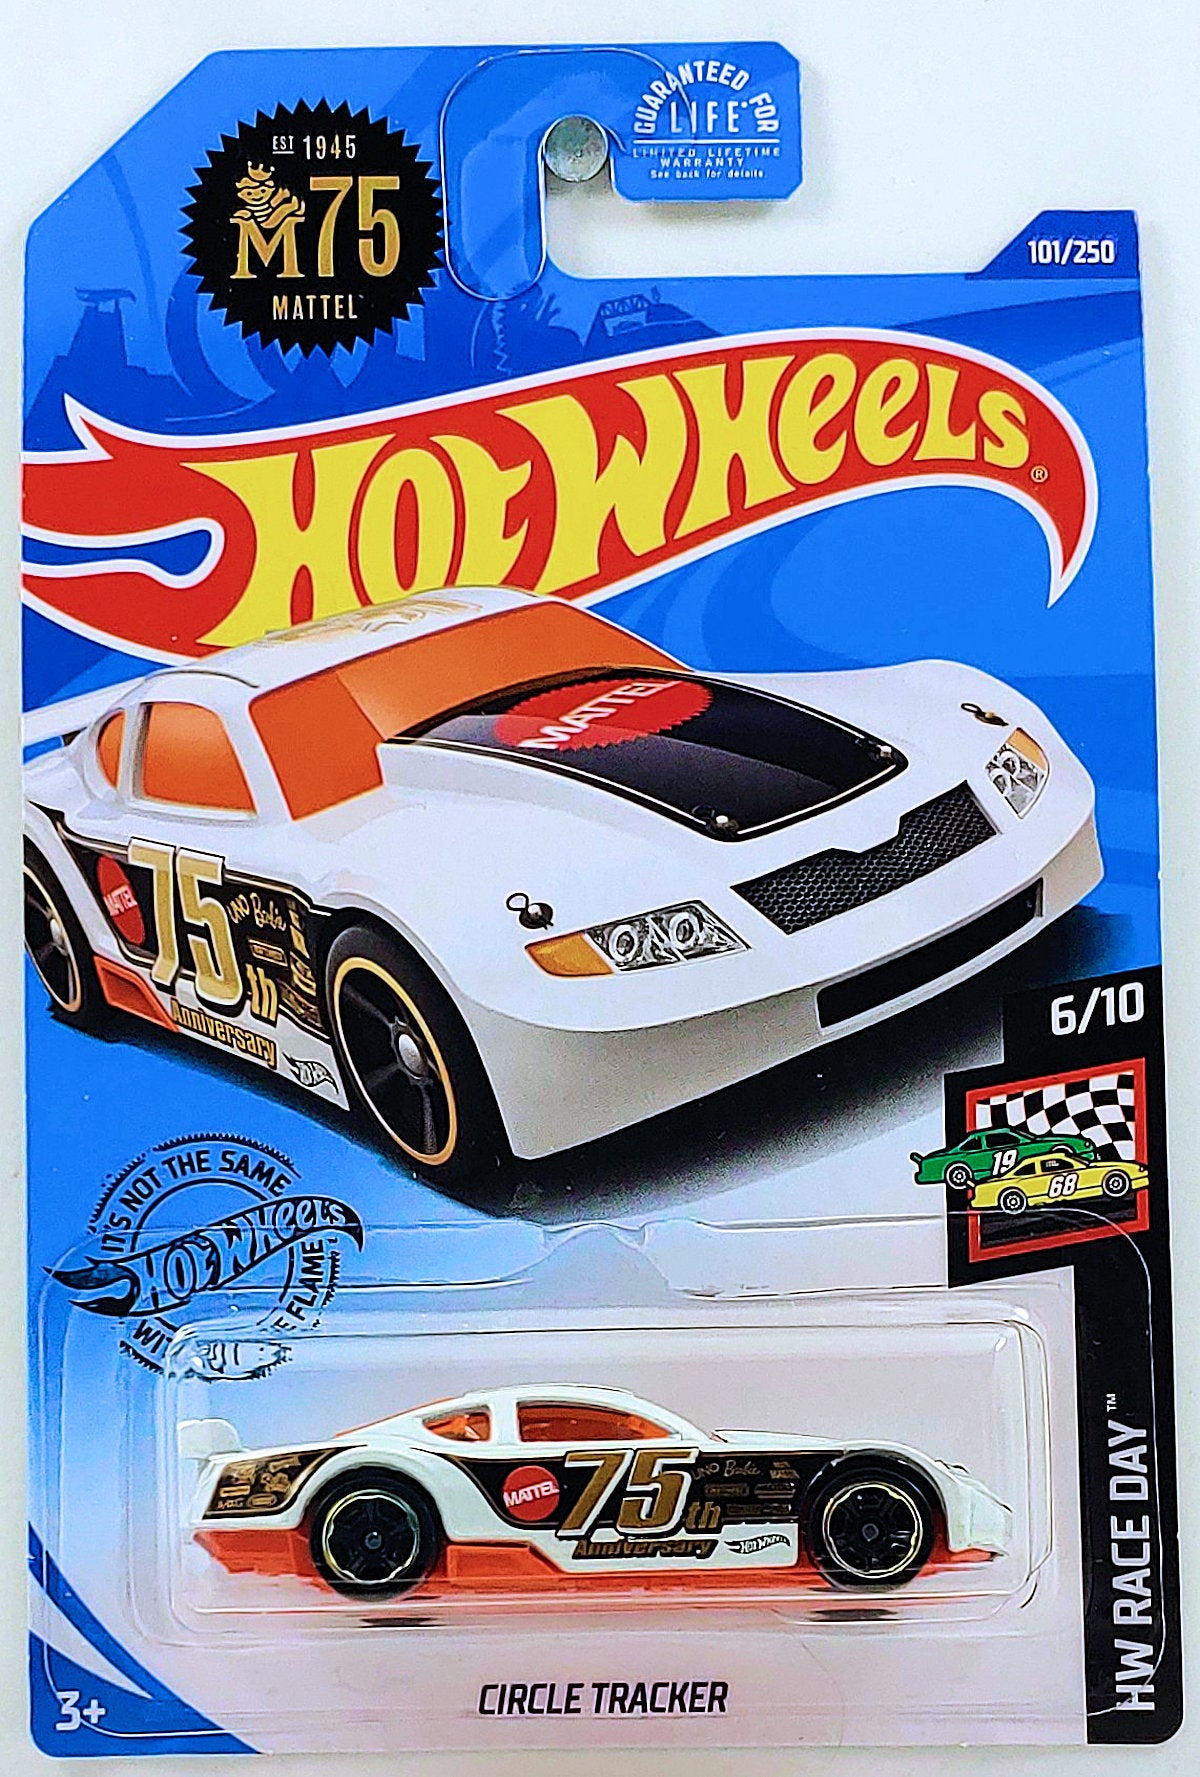 Hot Wheels 2020 - Collector # 101/250 - HW Race Day 6/10 - Circle Tracker - White - USA Card with Mattel 75th Logo